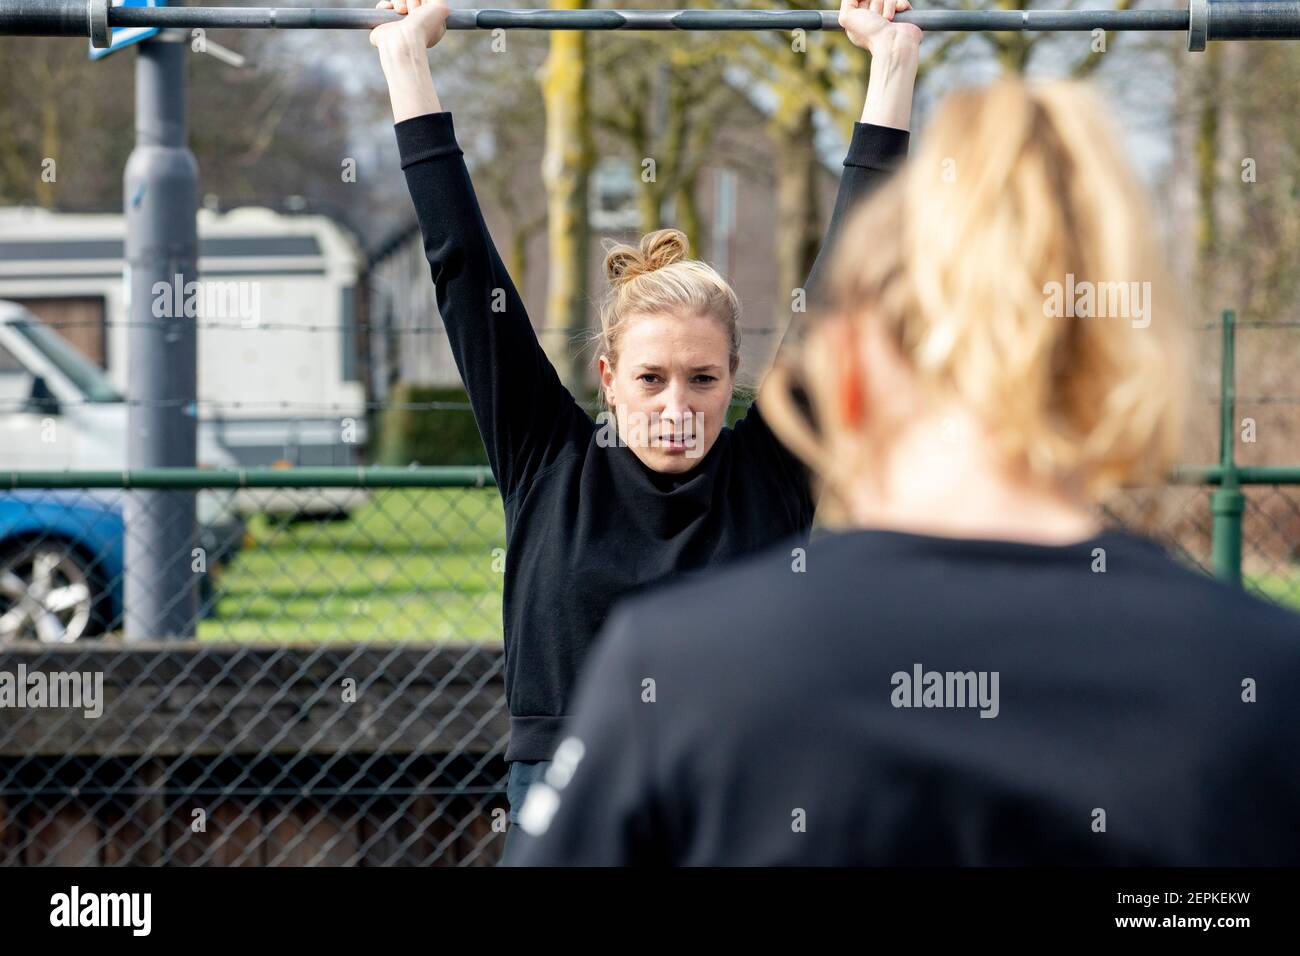 DEN BOSCH, NETHERLANDS - FEBRUARY 27: A woman is seen lifting weights outdoor on February 27, 2021 in Den Bosch, Netherlands. More than 300 gyms nationwide are protesting against the strict lockdowns measures that keep them closed. (Photo by Niels Wenstedt/BSR Agency/Alamy Live News) Stock Photo